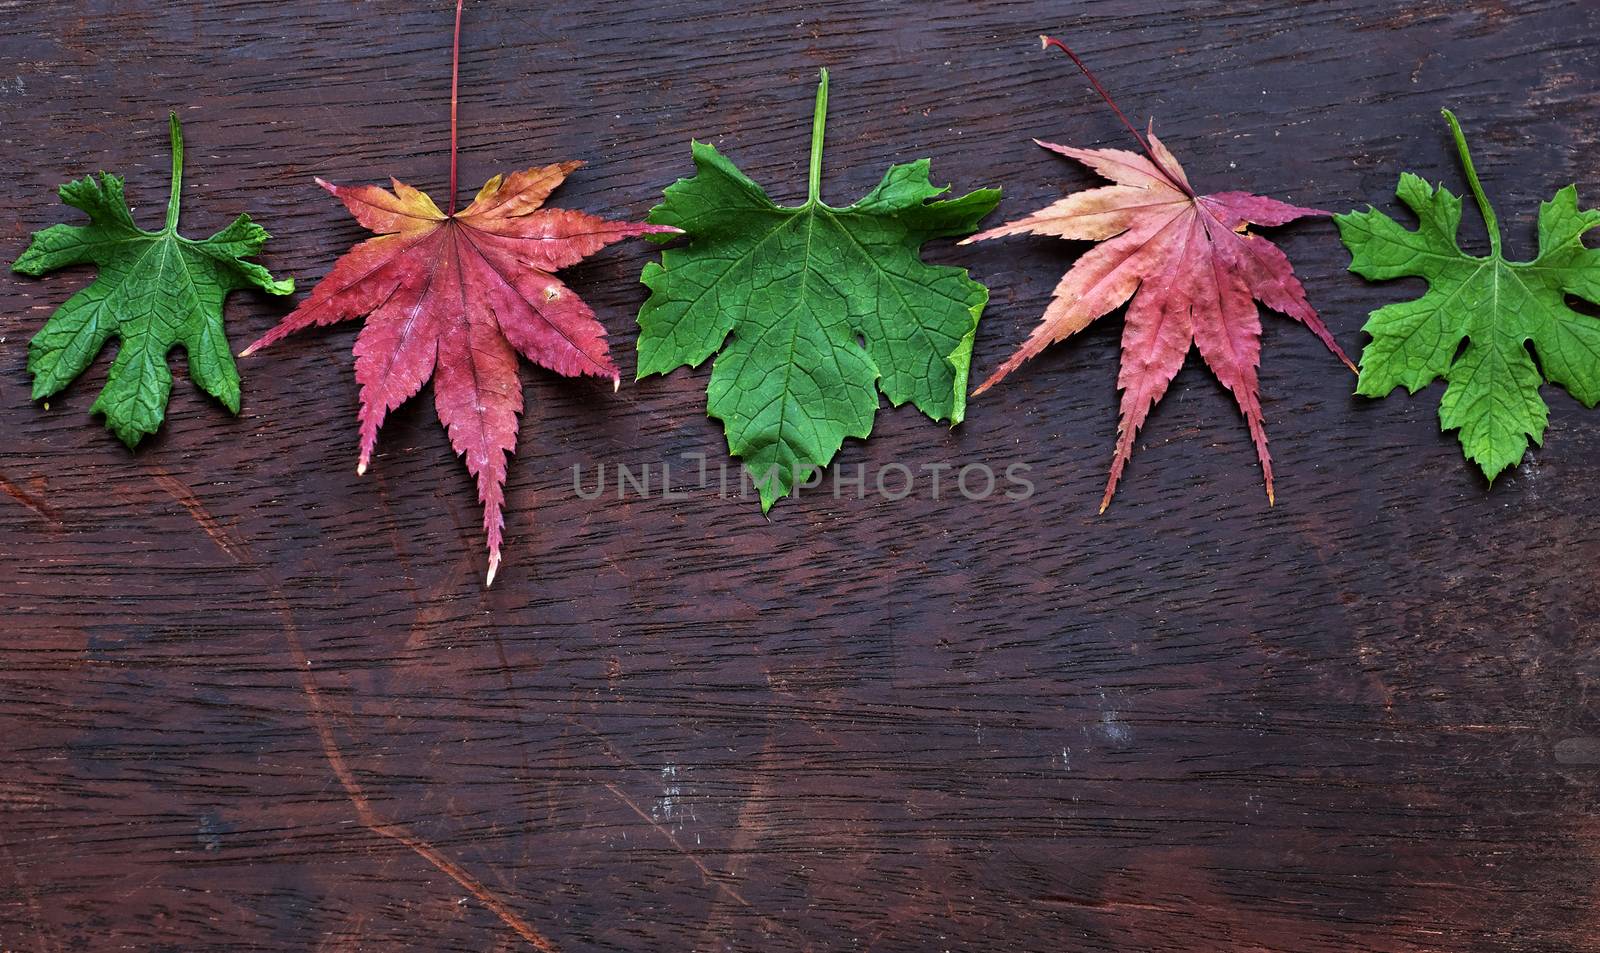 Thanksgiving background with colorful maple leaf on wood background, nice leaves in autumn season